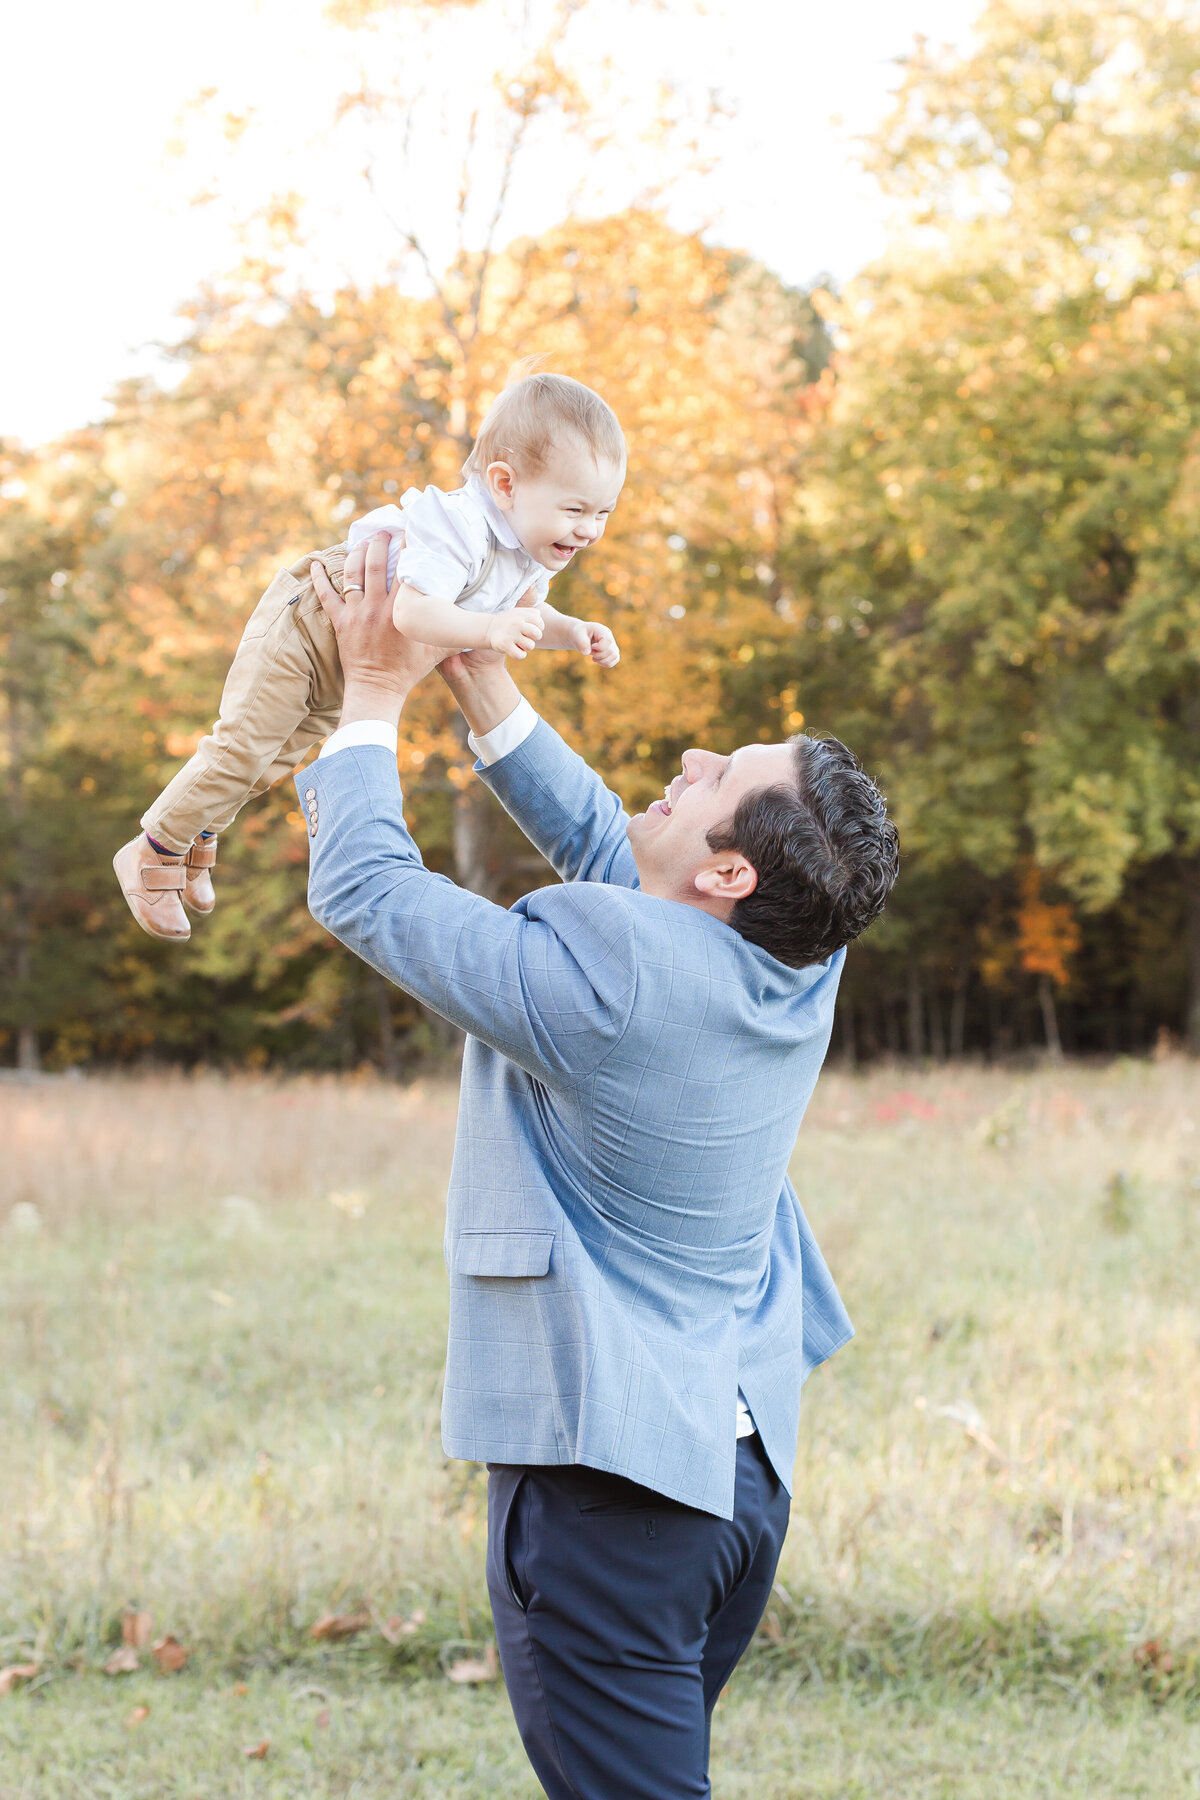 A sweet dad playing with his toddler boy by throwing him in the air outside in the Fall by Northern Virginia Family Photographer